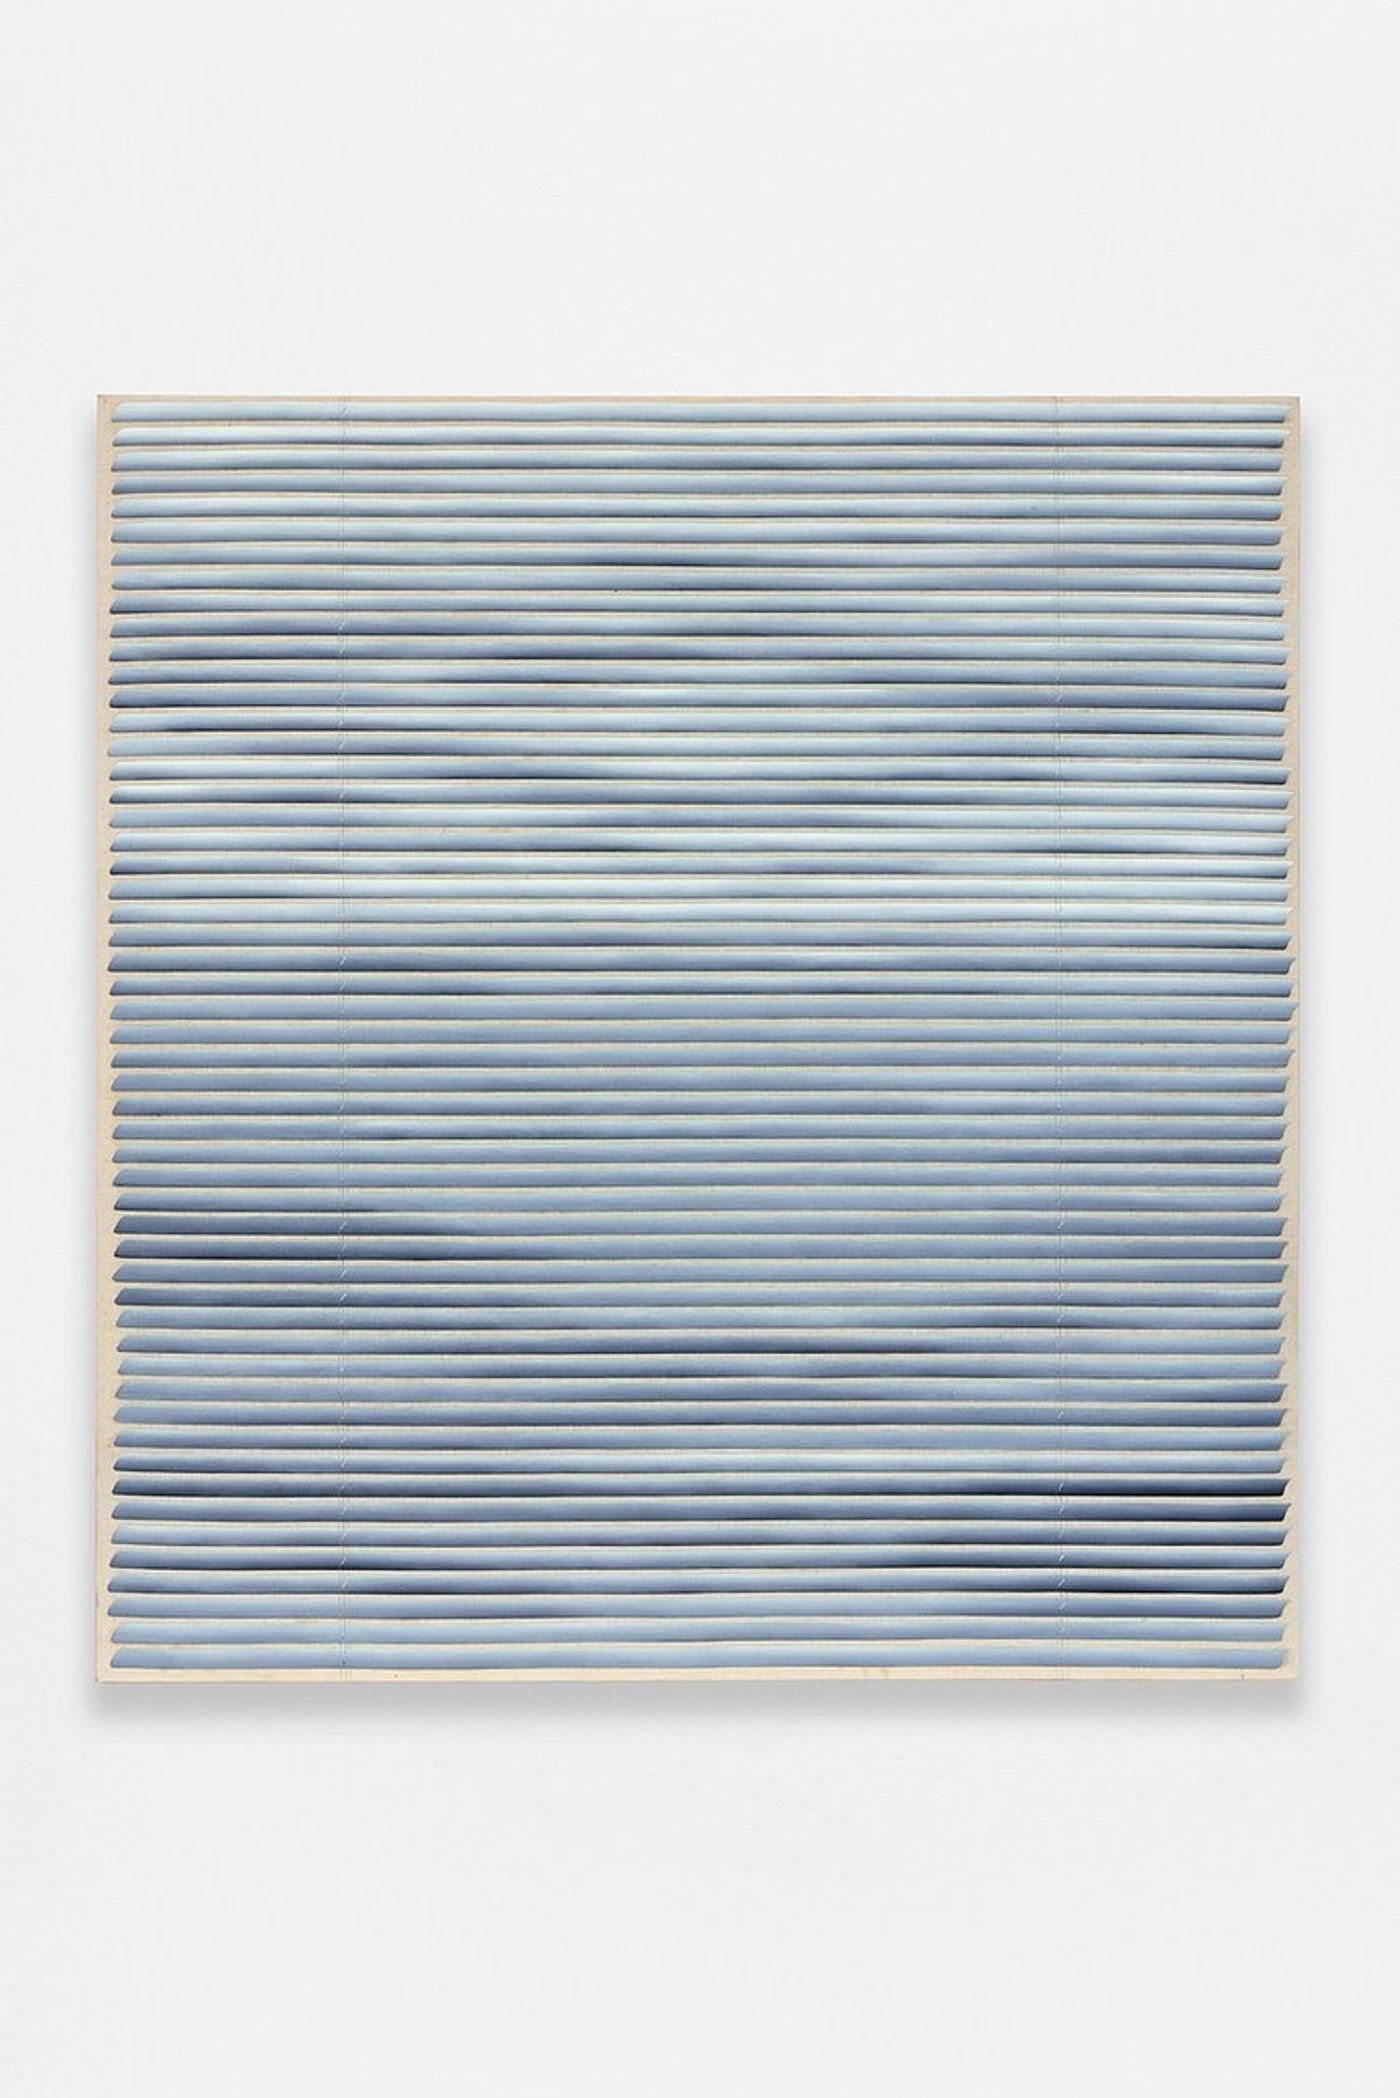 Image of Untitled (Gray Blinds), 2015: Oil on linen